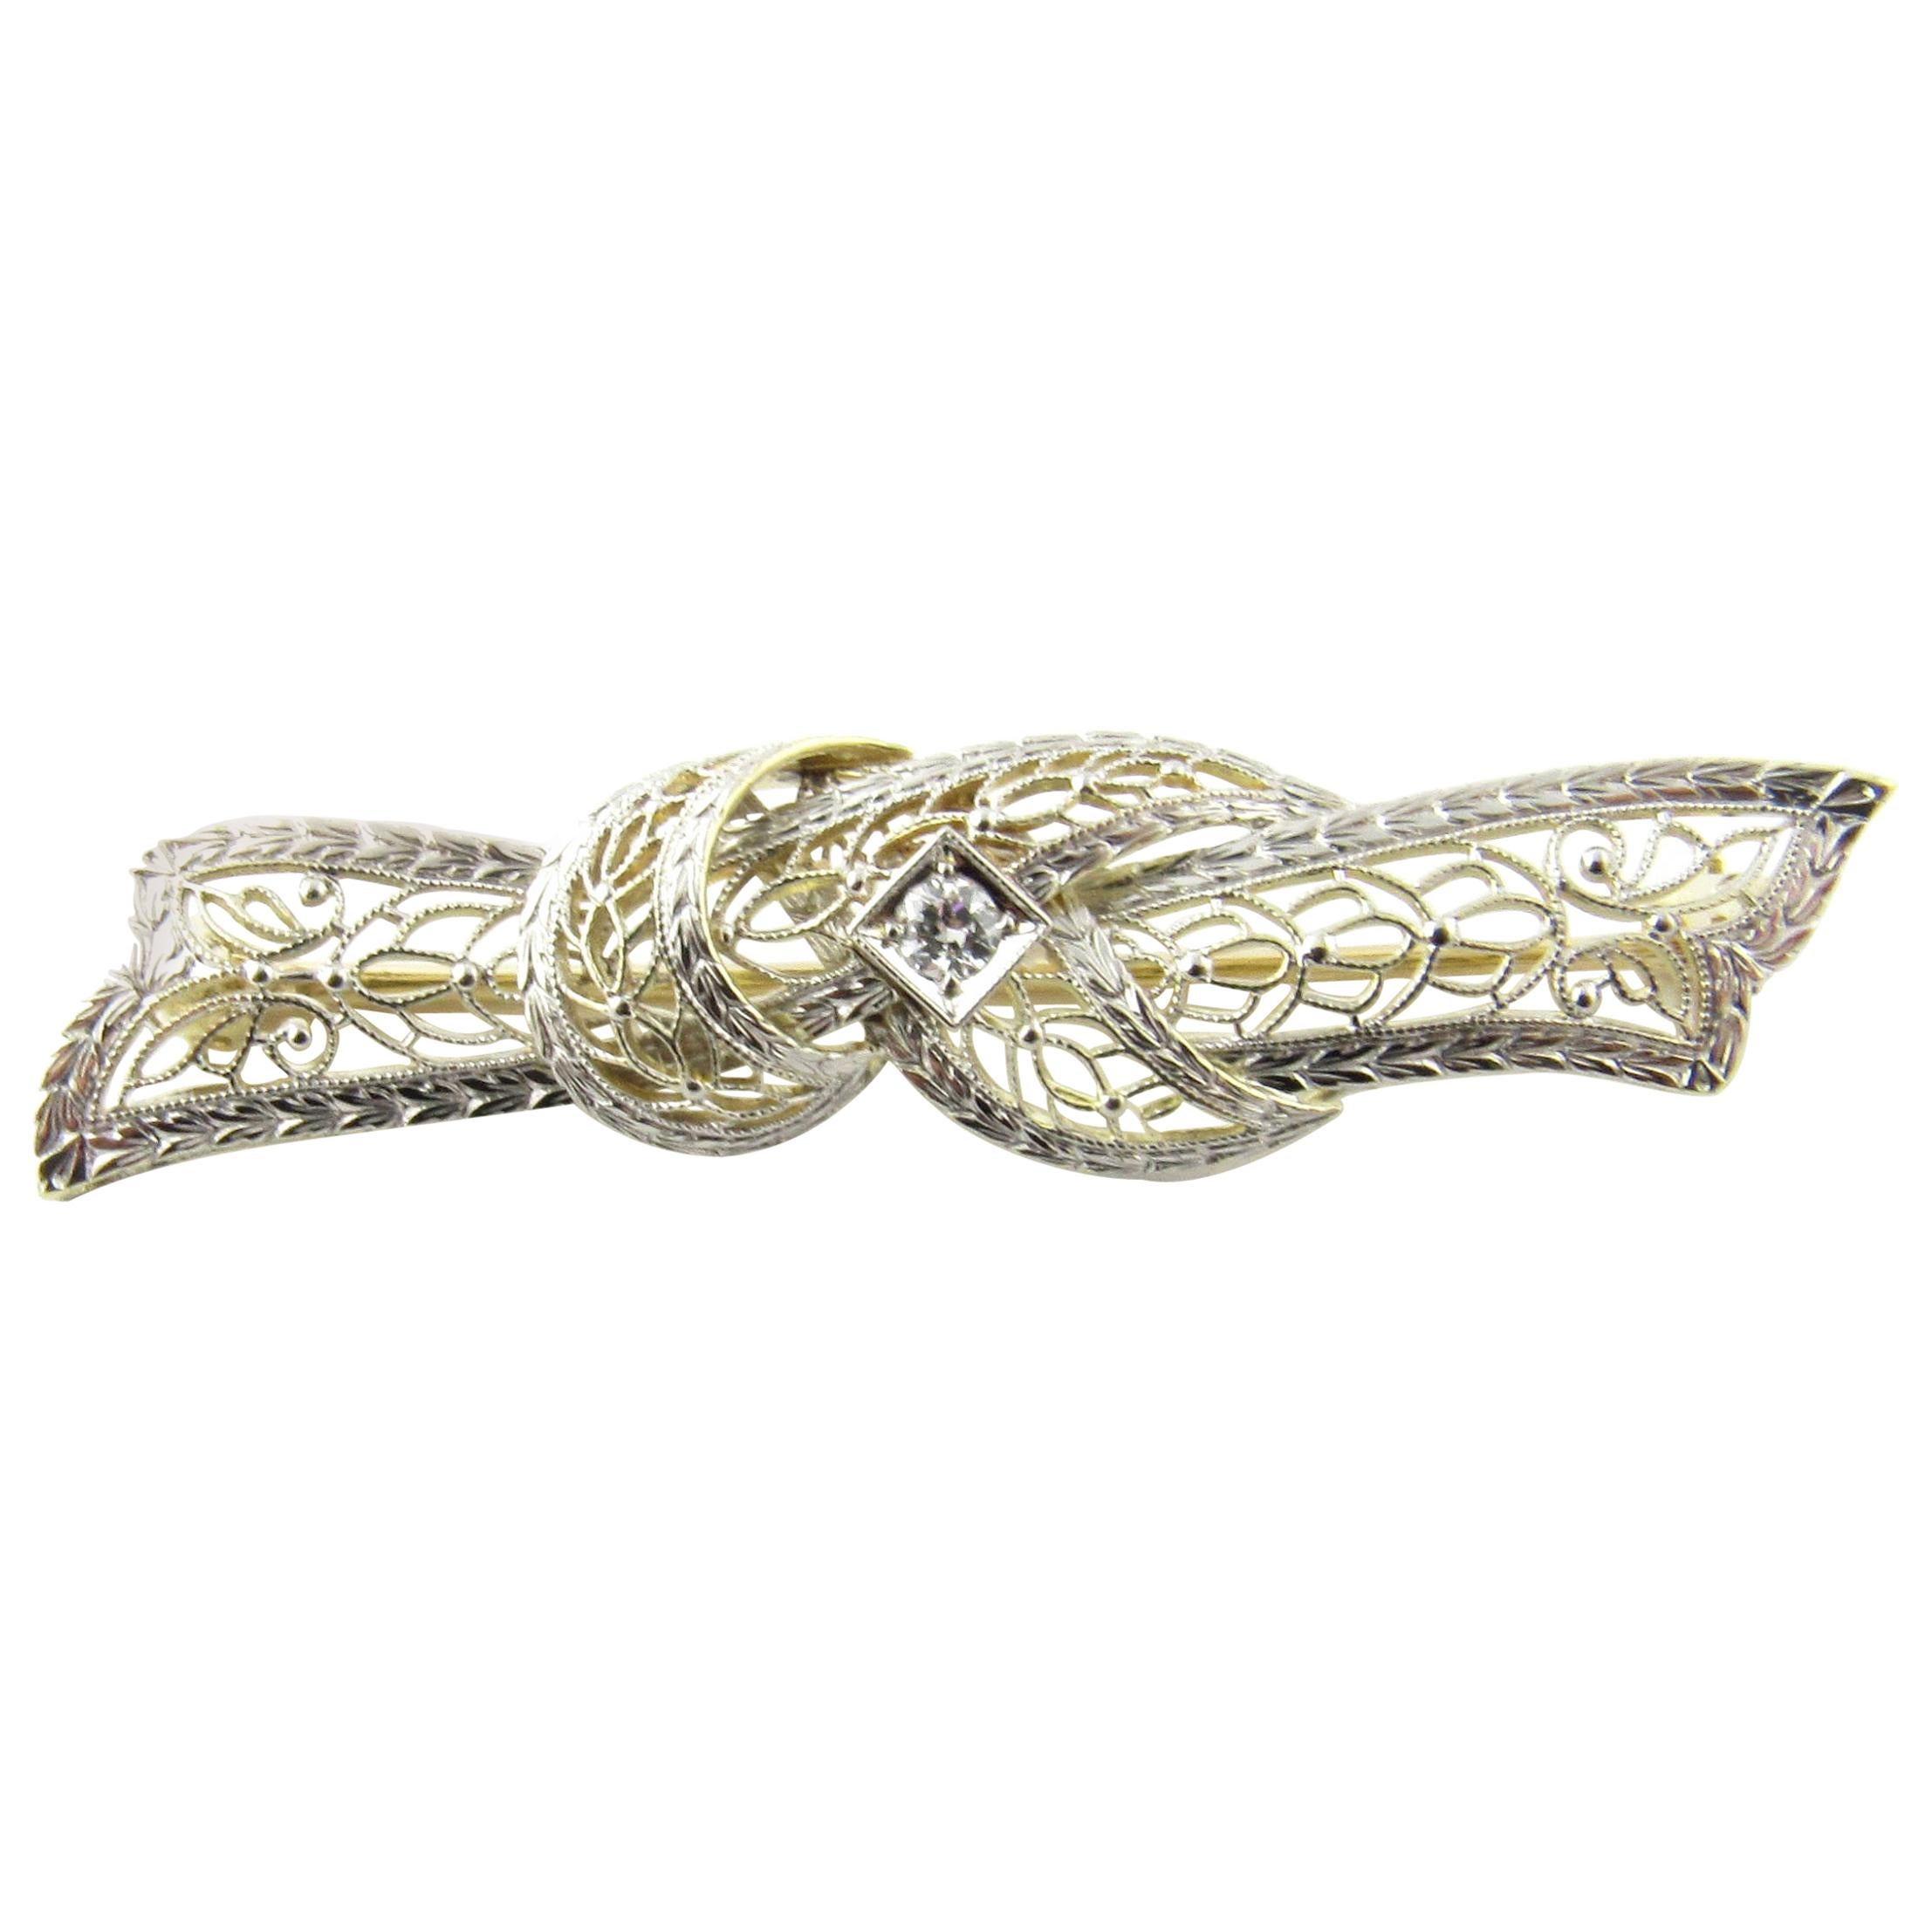 14 Karat White and Yellow Gold and Diamond Brooch or Pin